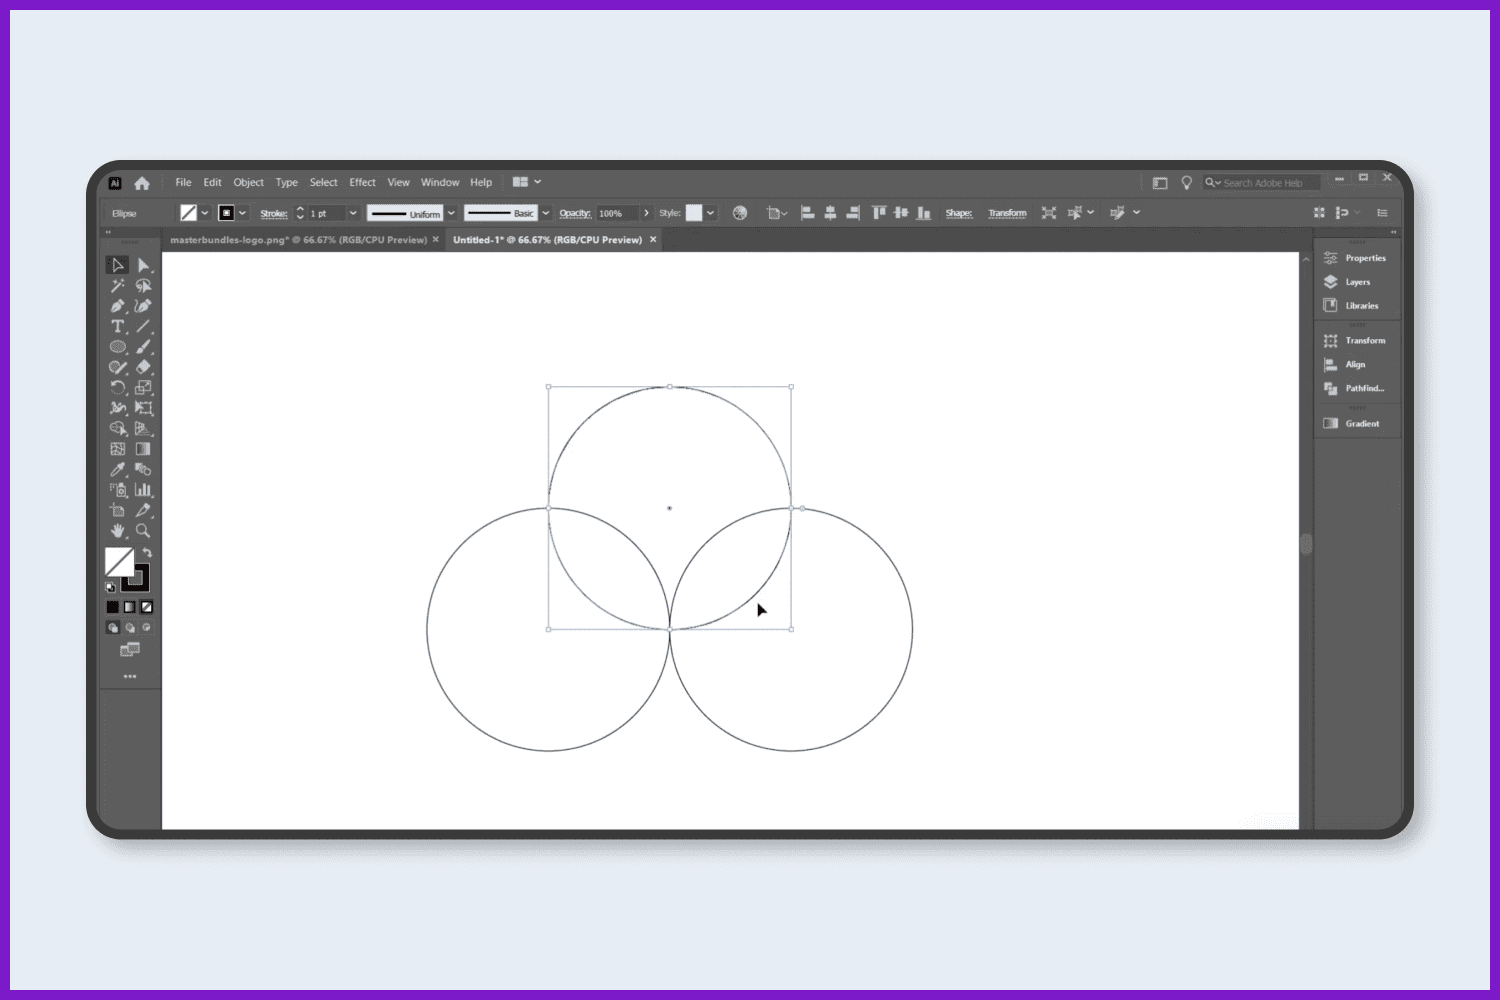 Copy the circle and place it up in the middle of the two circles.